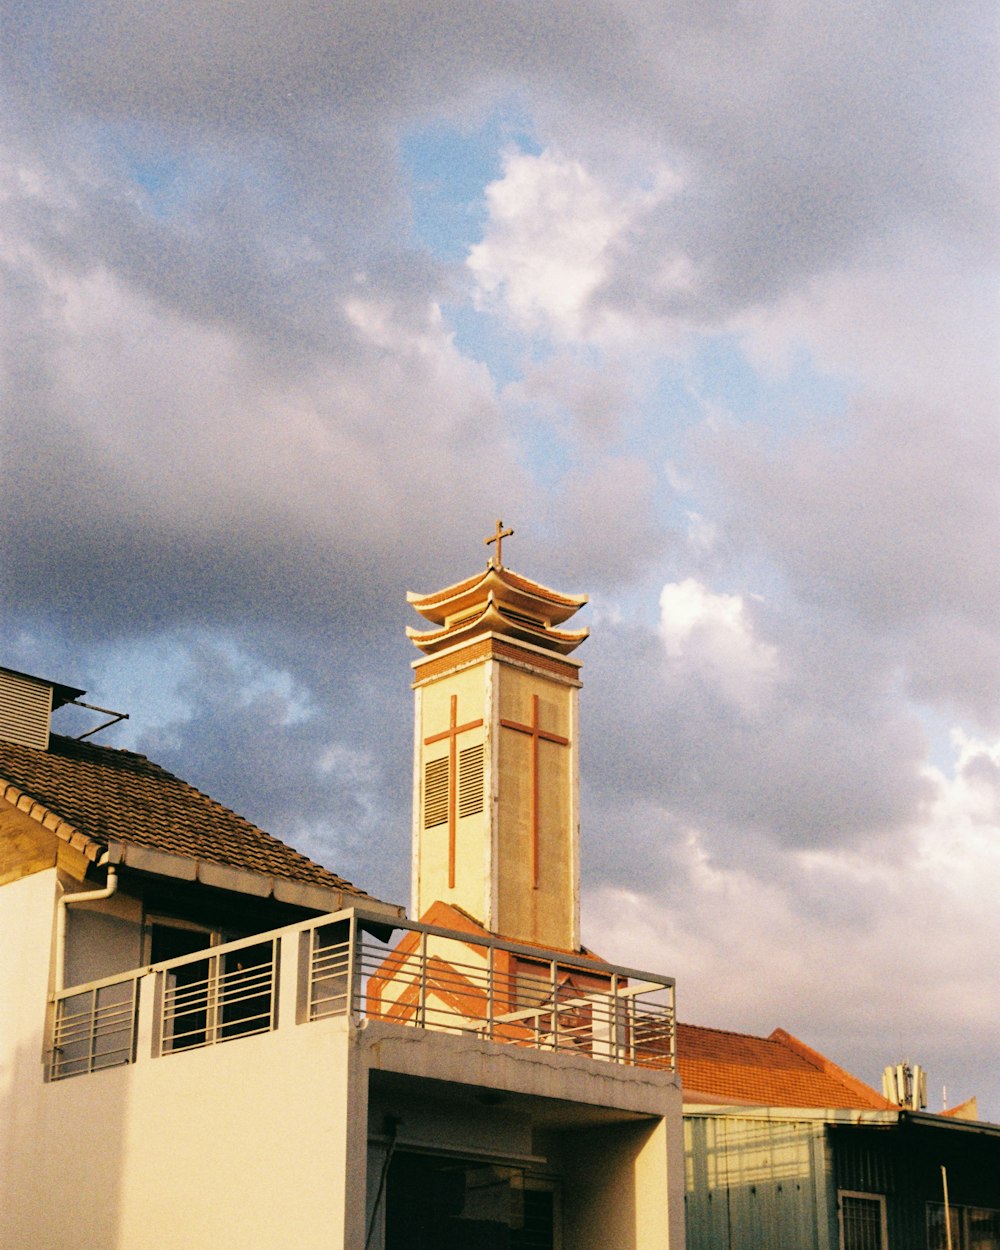 a clock tower on top of a building under a cloudy sky